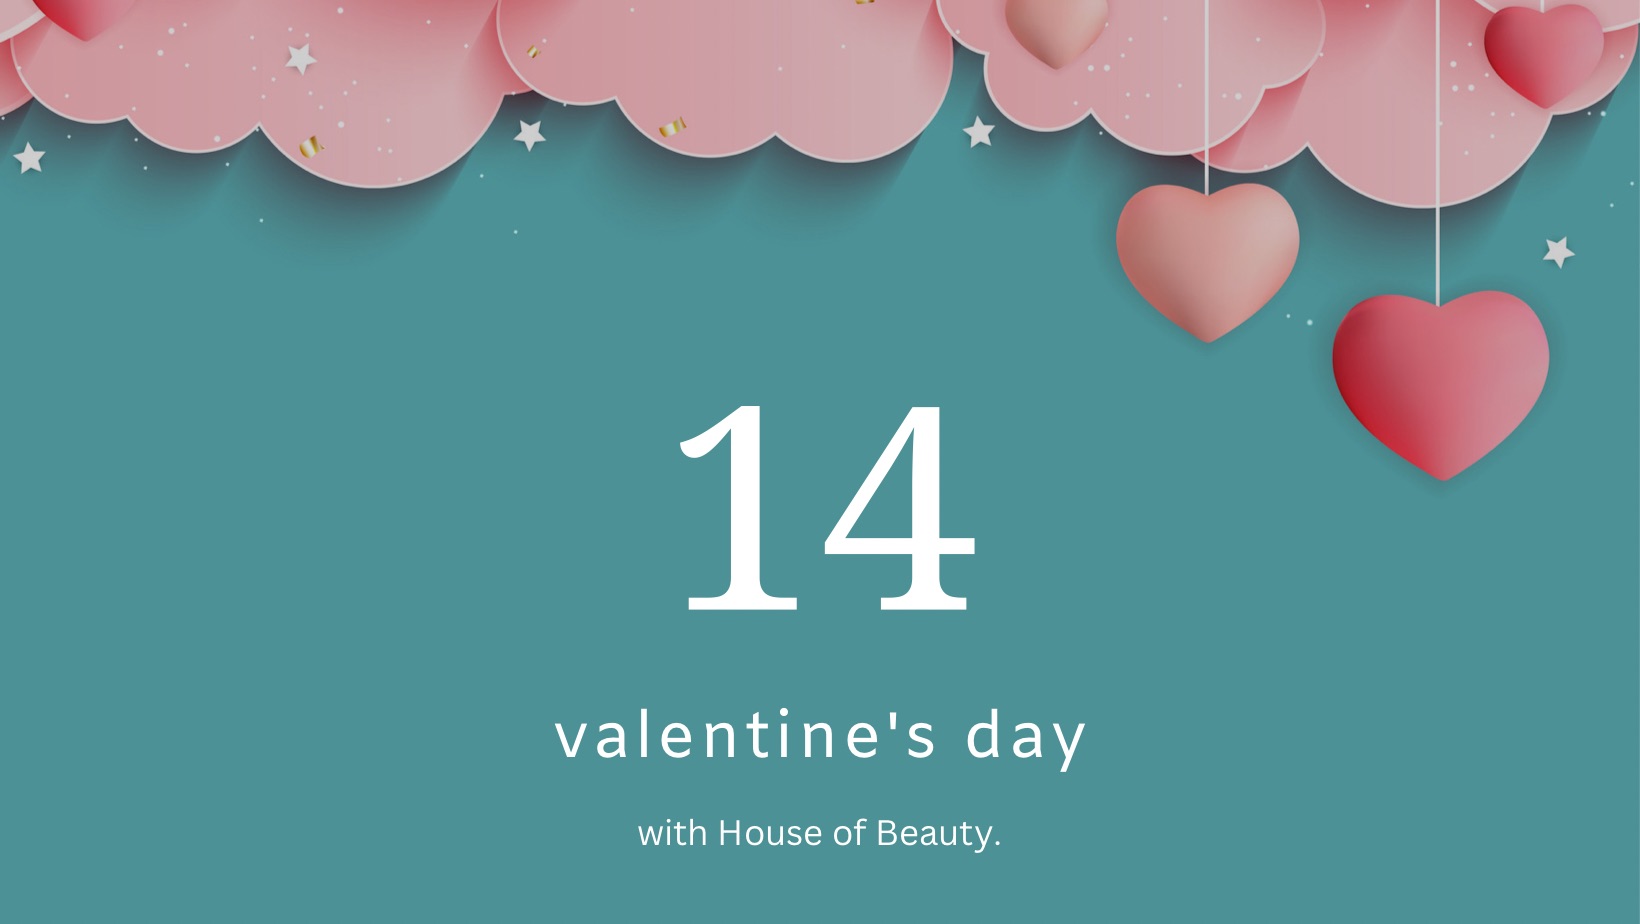 House of Beauty Galentines